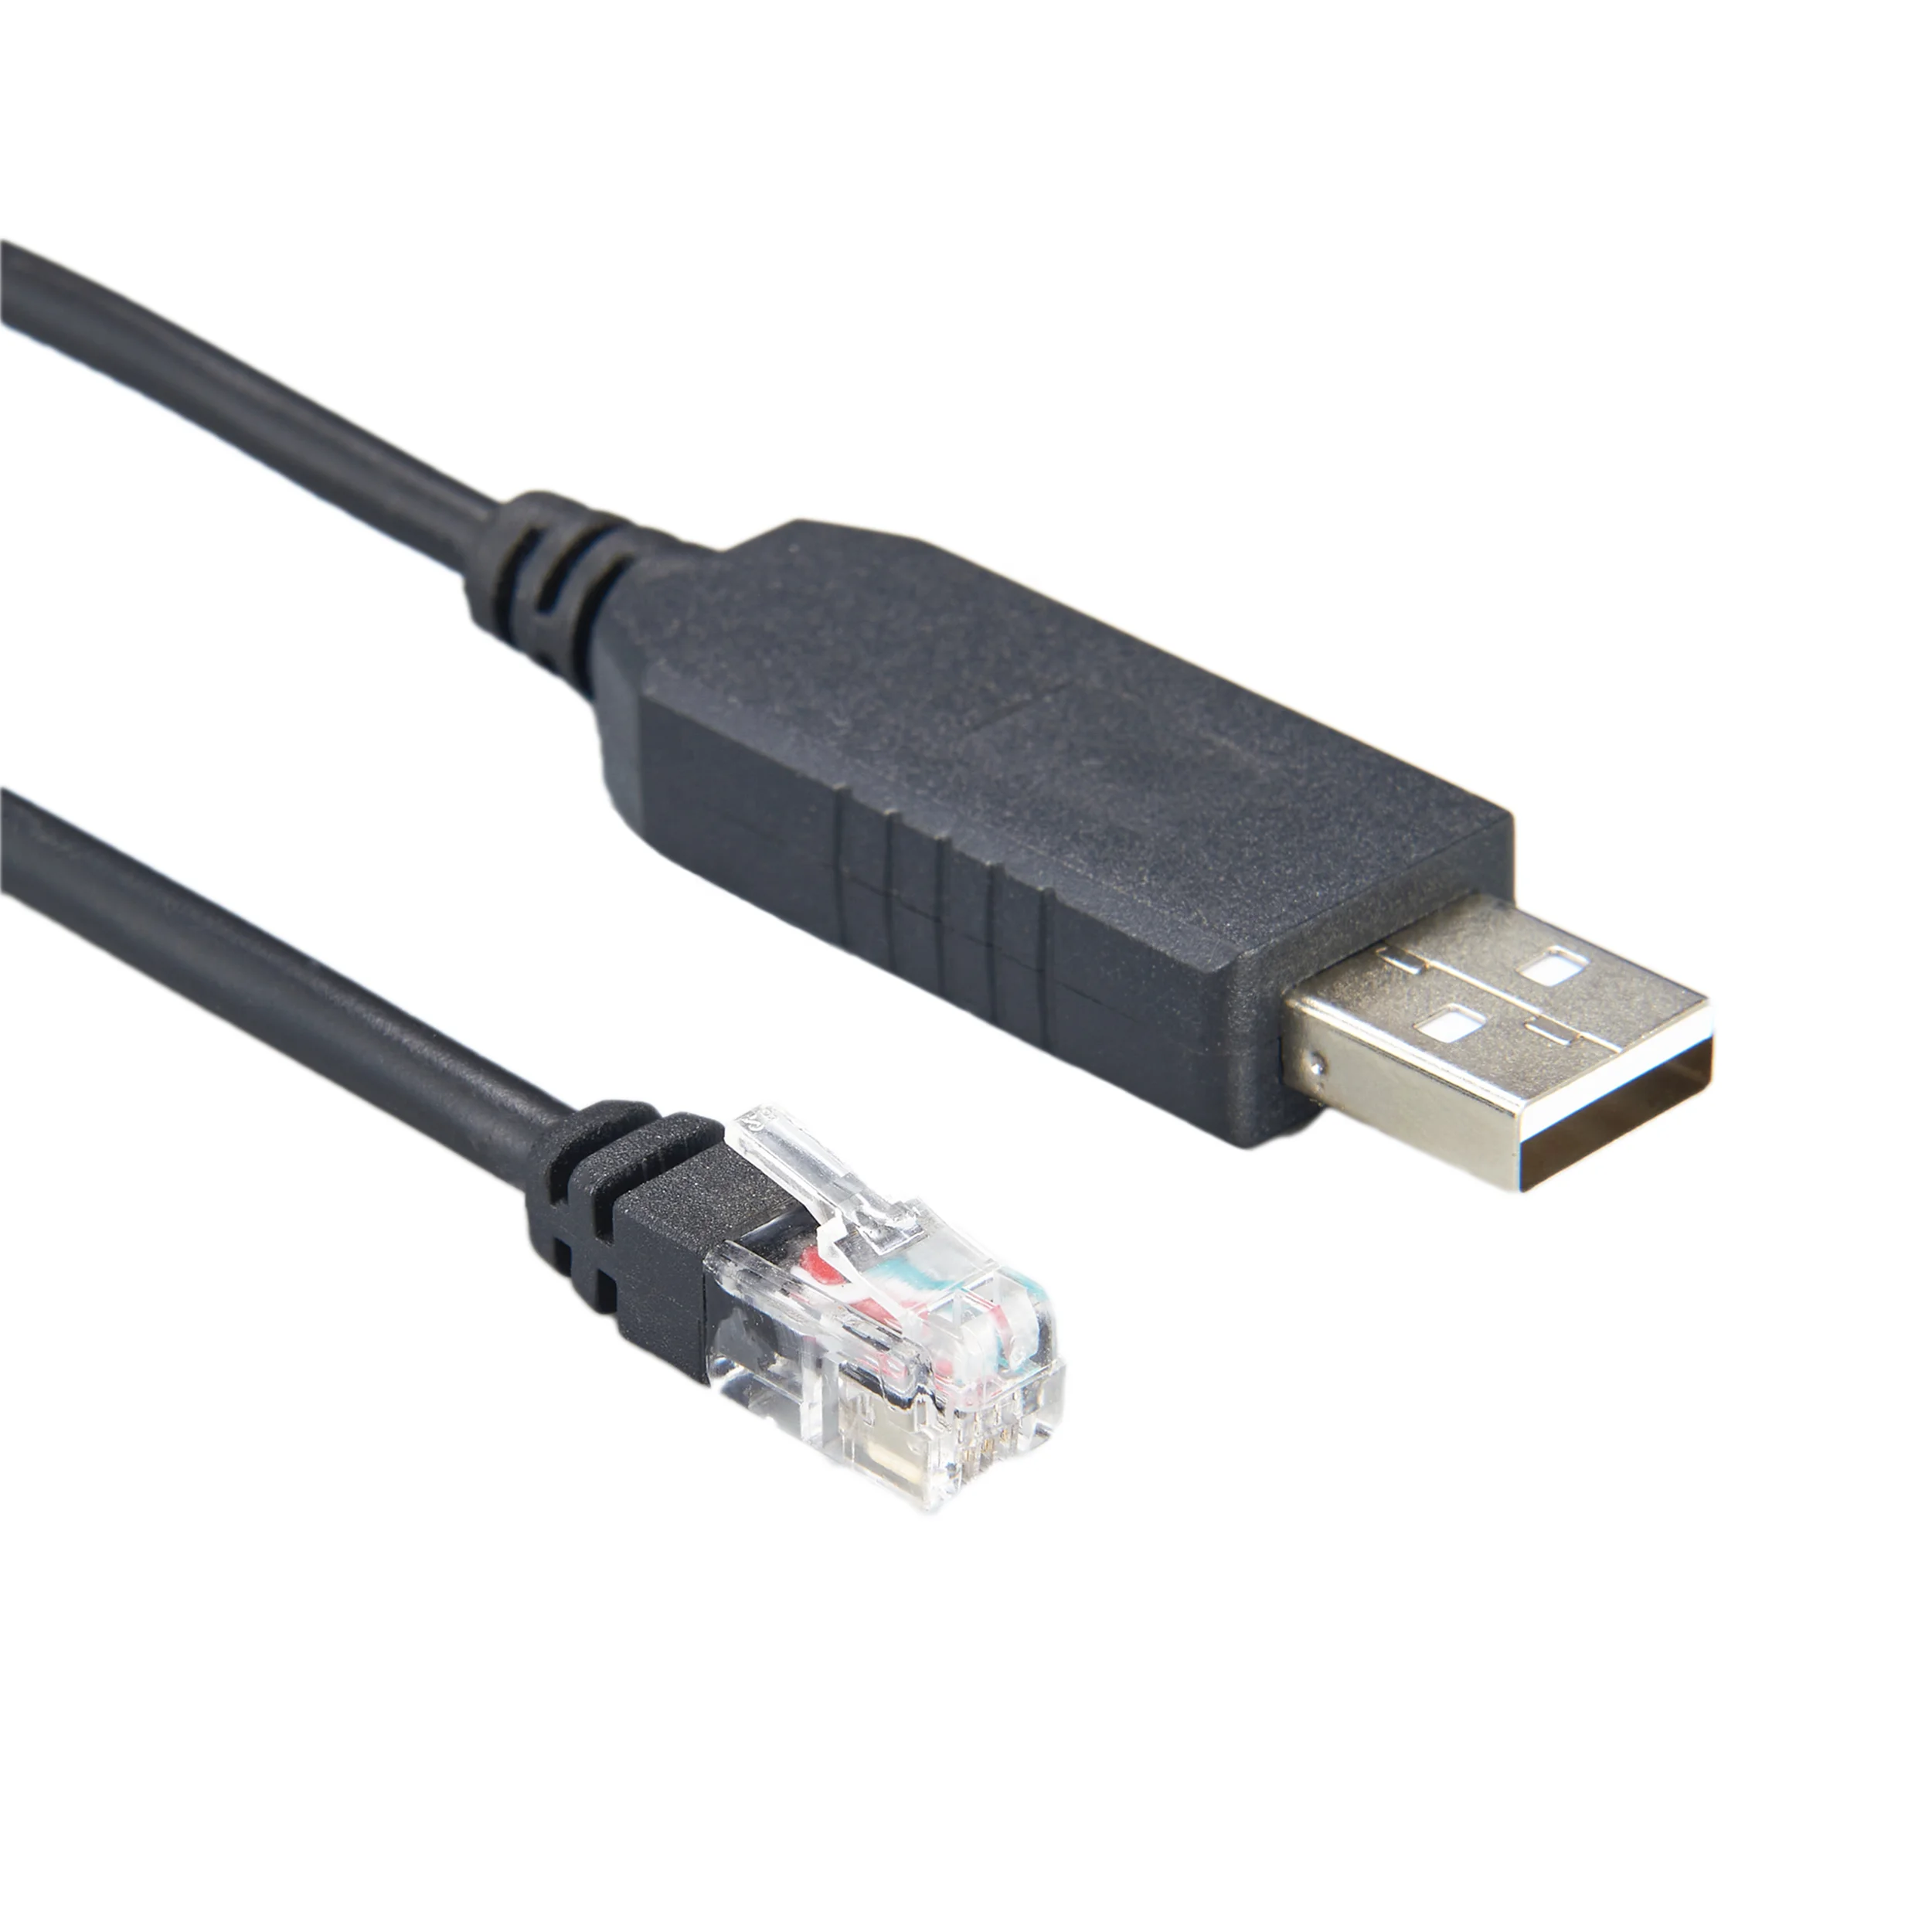 Cable Length: 180cm, Color: 4 Wires end Cable Computer Cables Android USB Host pl2303hxd USB rs232 to rj11 rj12 rj25 rj45 Serial Cable